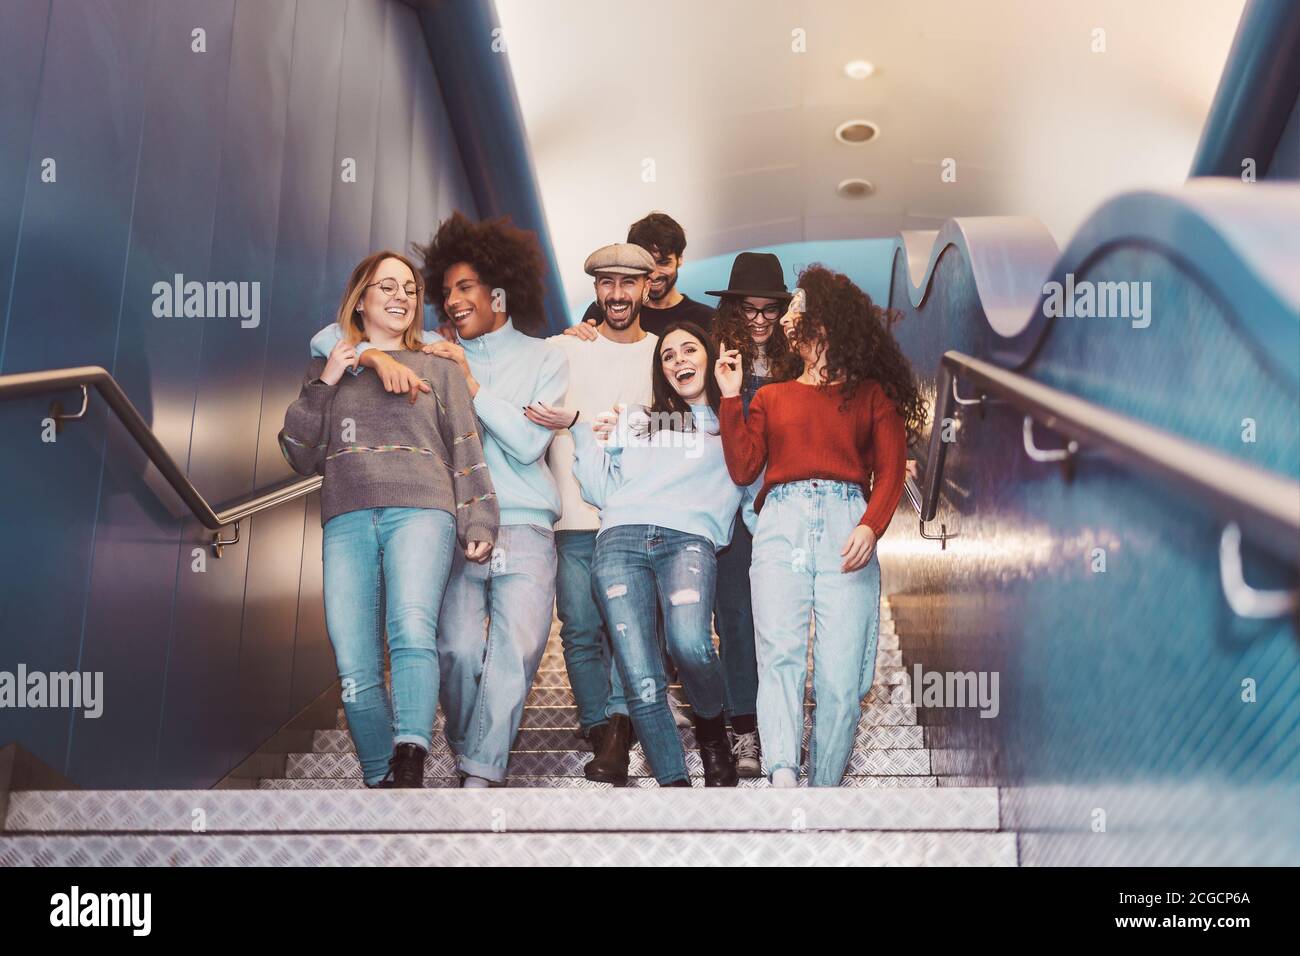 Group young friends having fun in subway underground metropolitan - Happy trendy people sharing time and laughing together Stock Photo